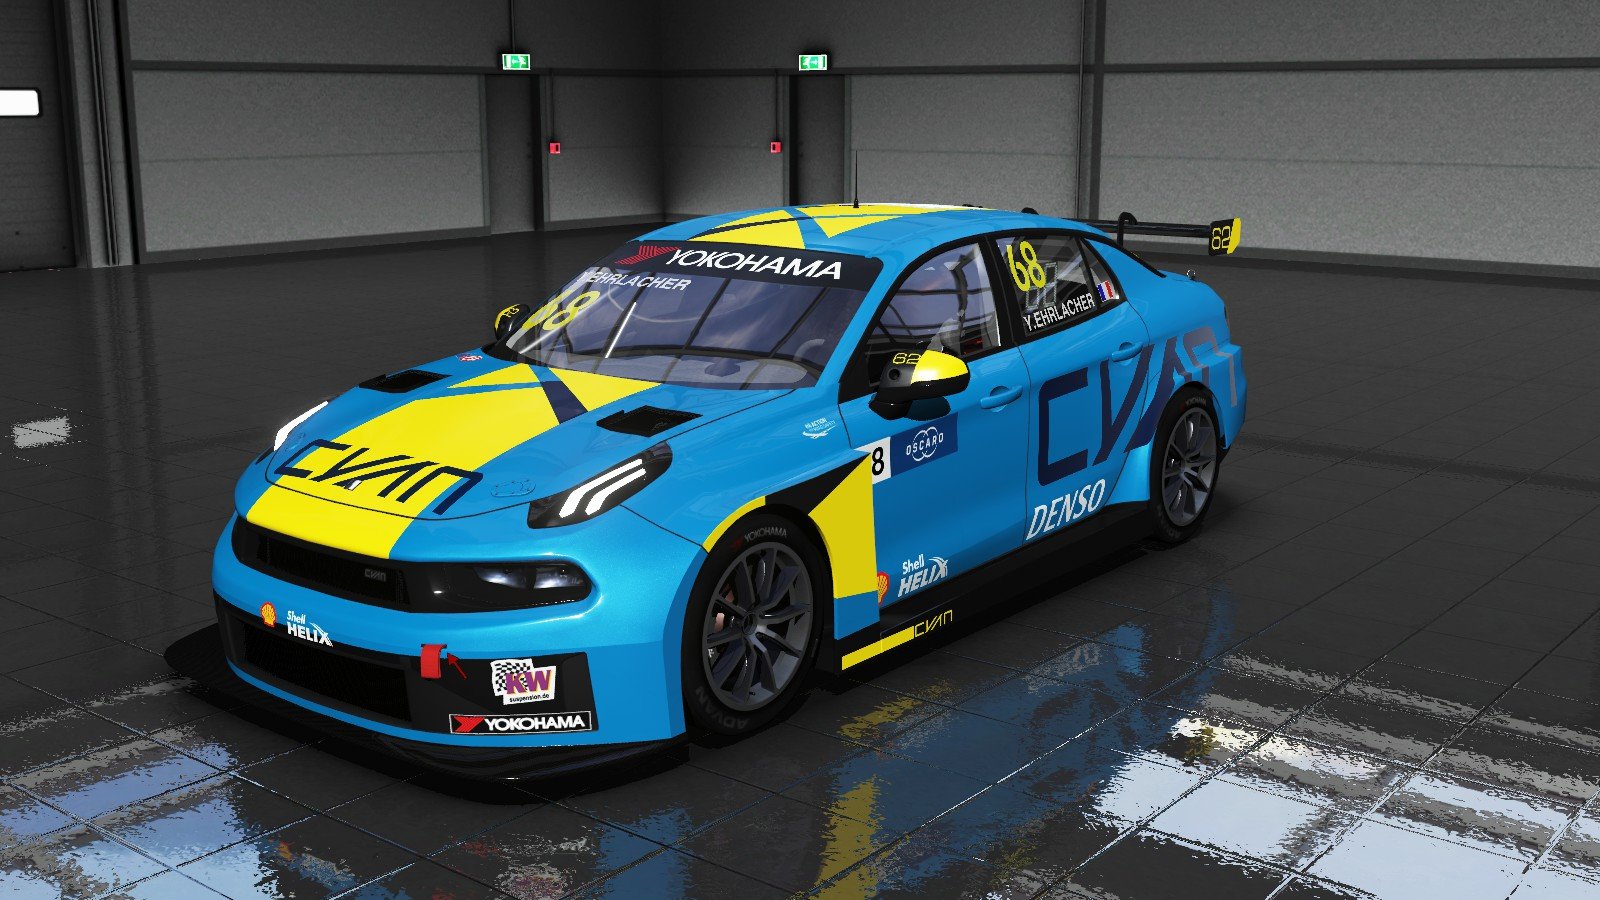 More information about "rFactor 2: TCR 2019 Season mod aggiornato by Tommy78"